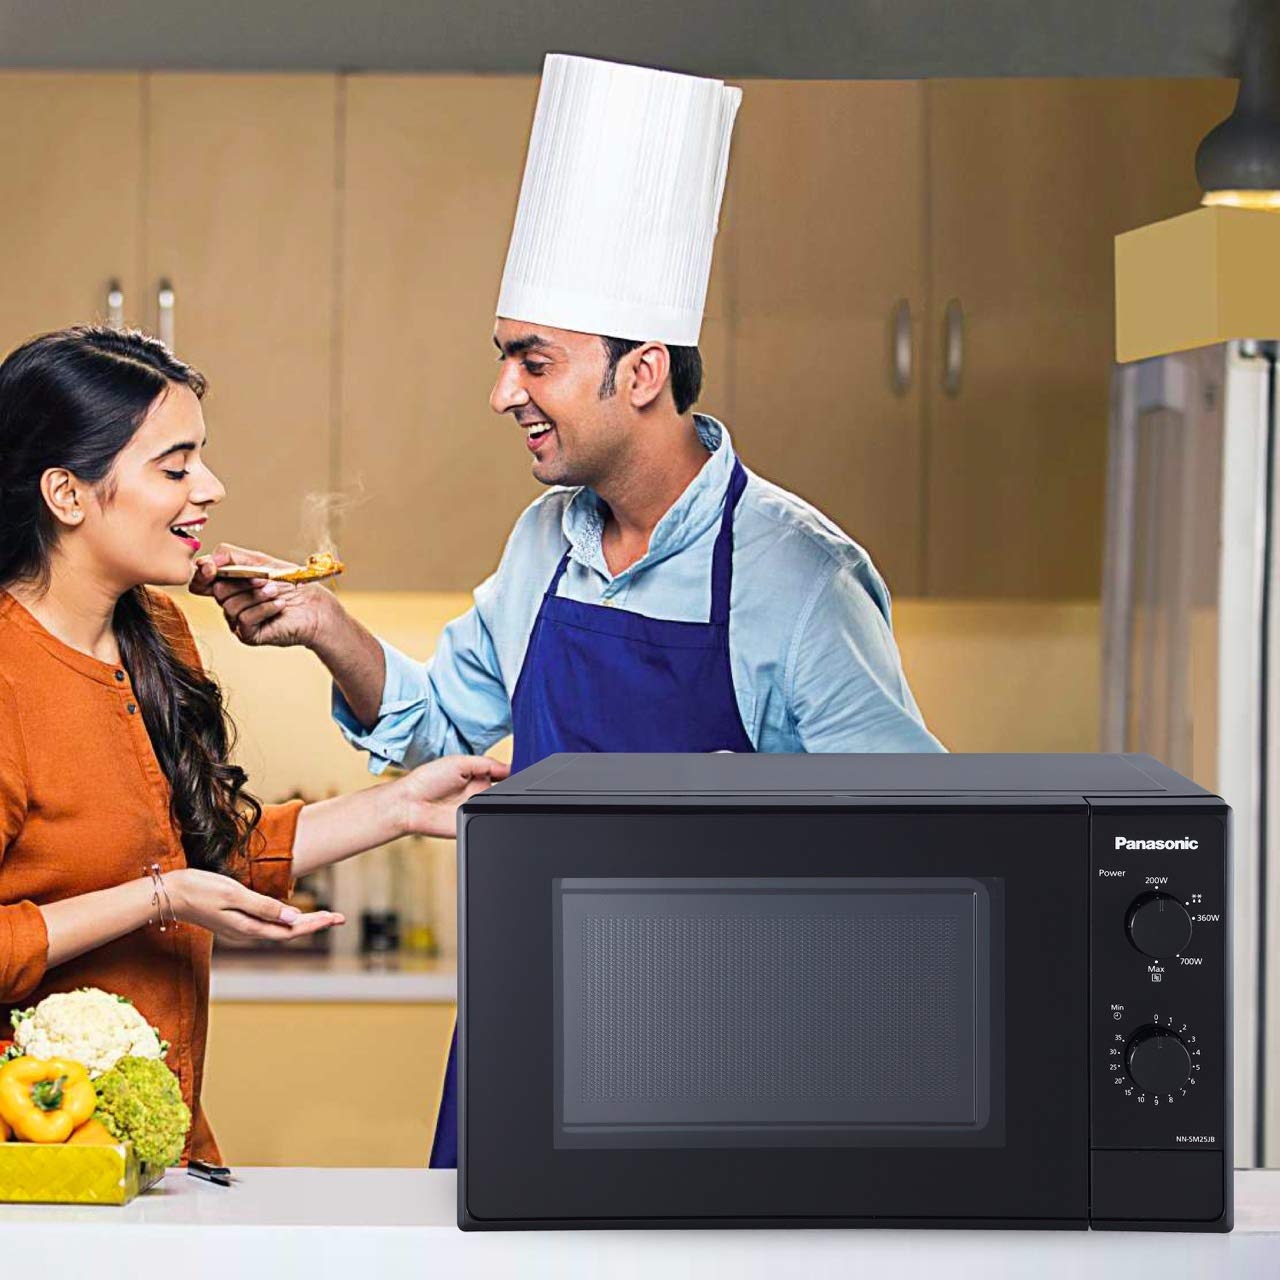 Best Panasonic Solo Microwave Ovens In India 2021!